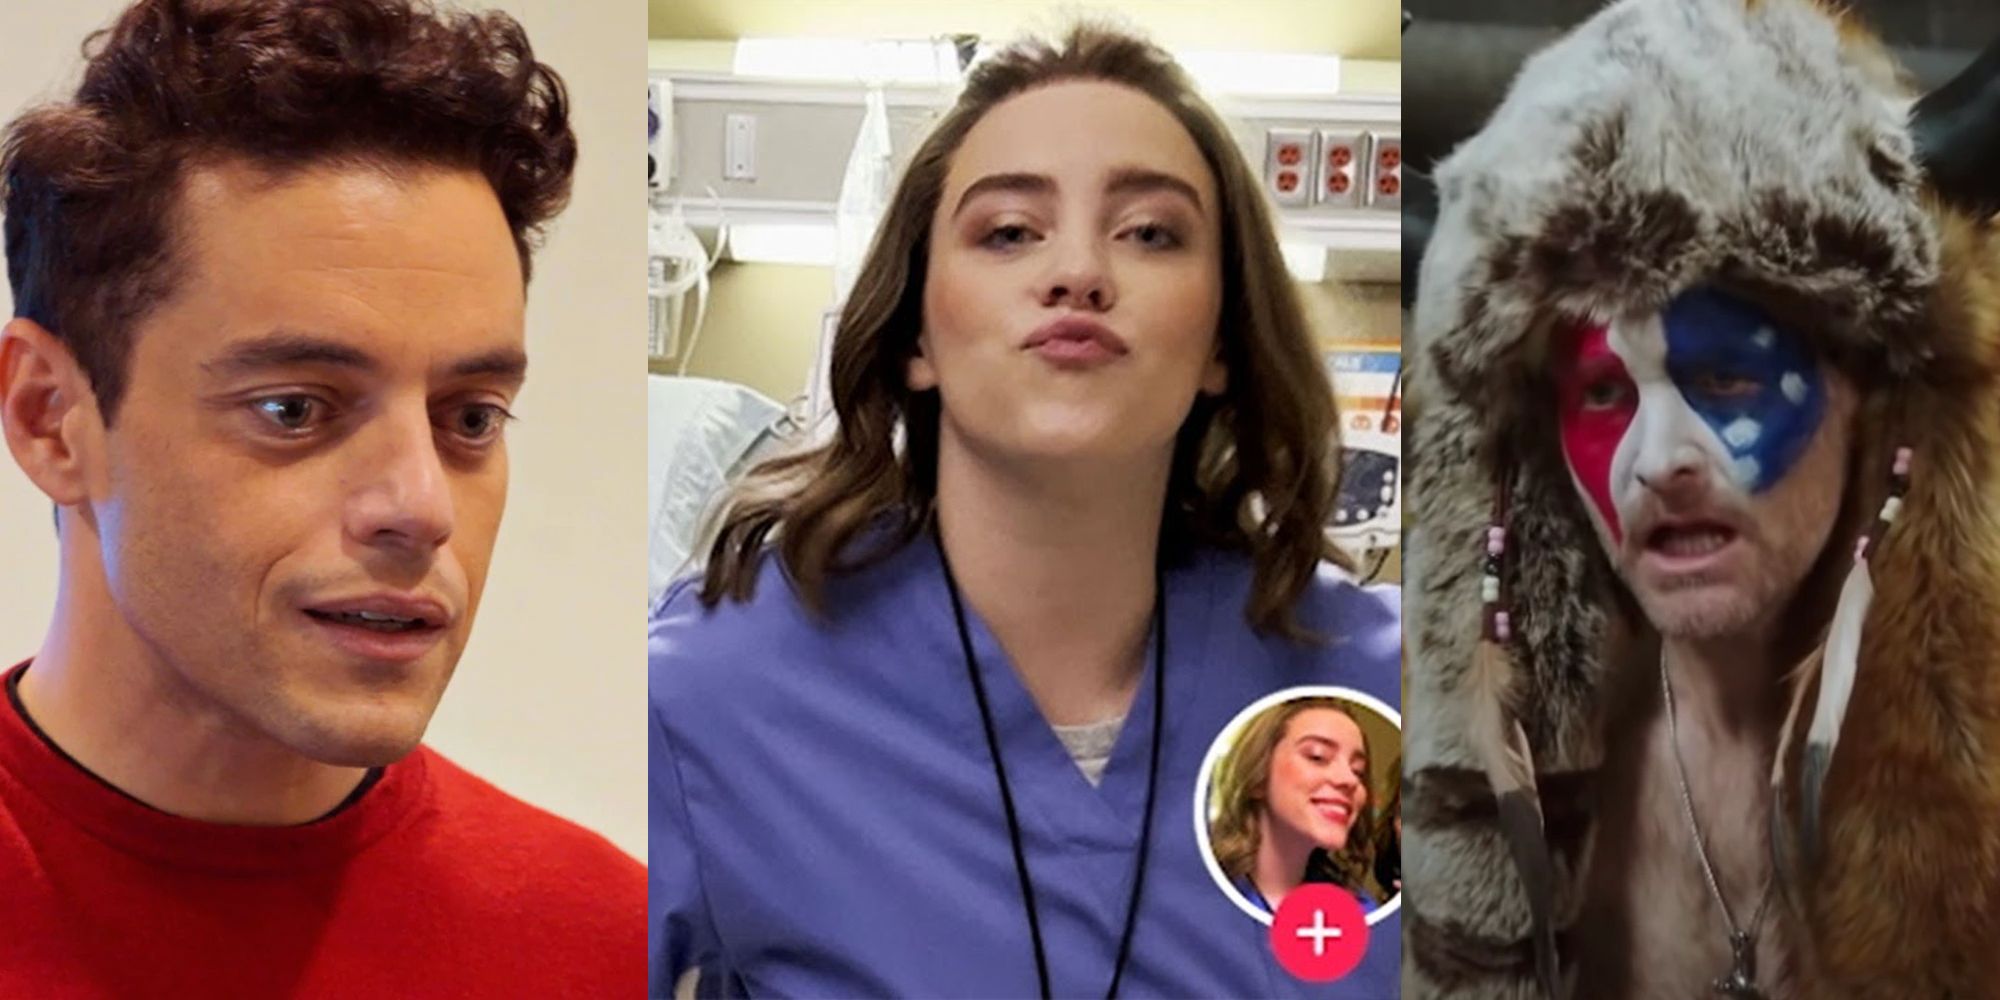 Rami Malek in a Please Don't Destroy sketch on SNL; Billie Eilish as a nurse in the TikTok sketch; MacGruber dressed as the January 6th Viking 